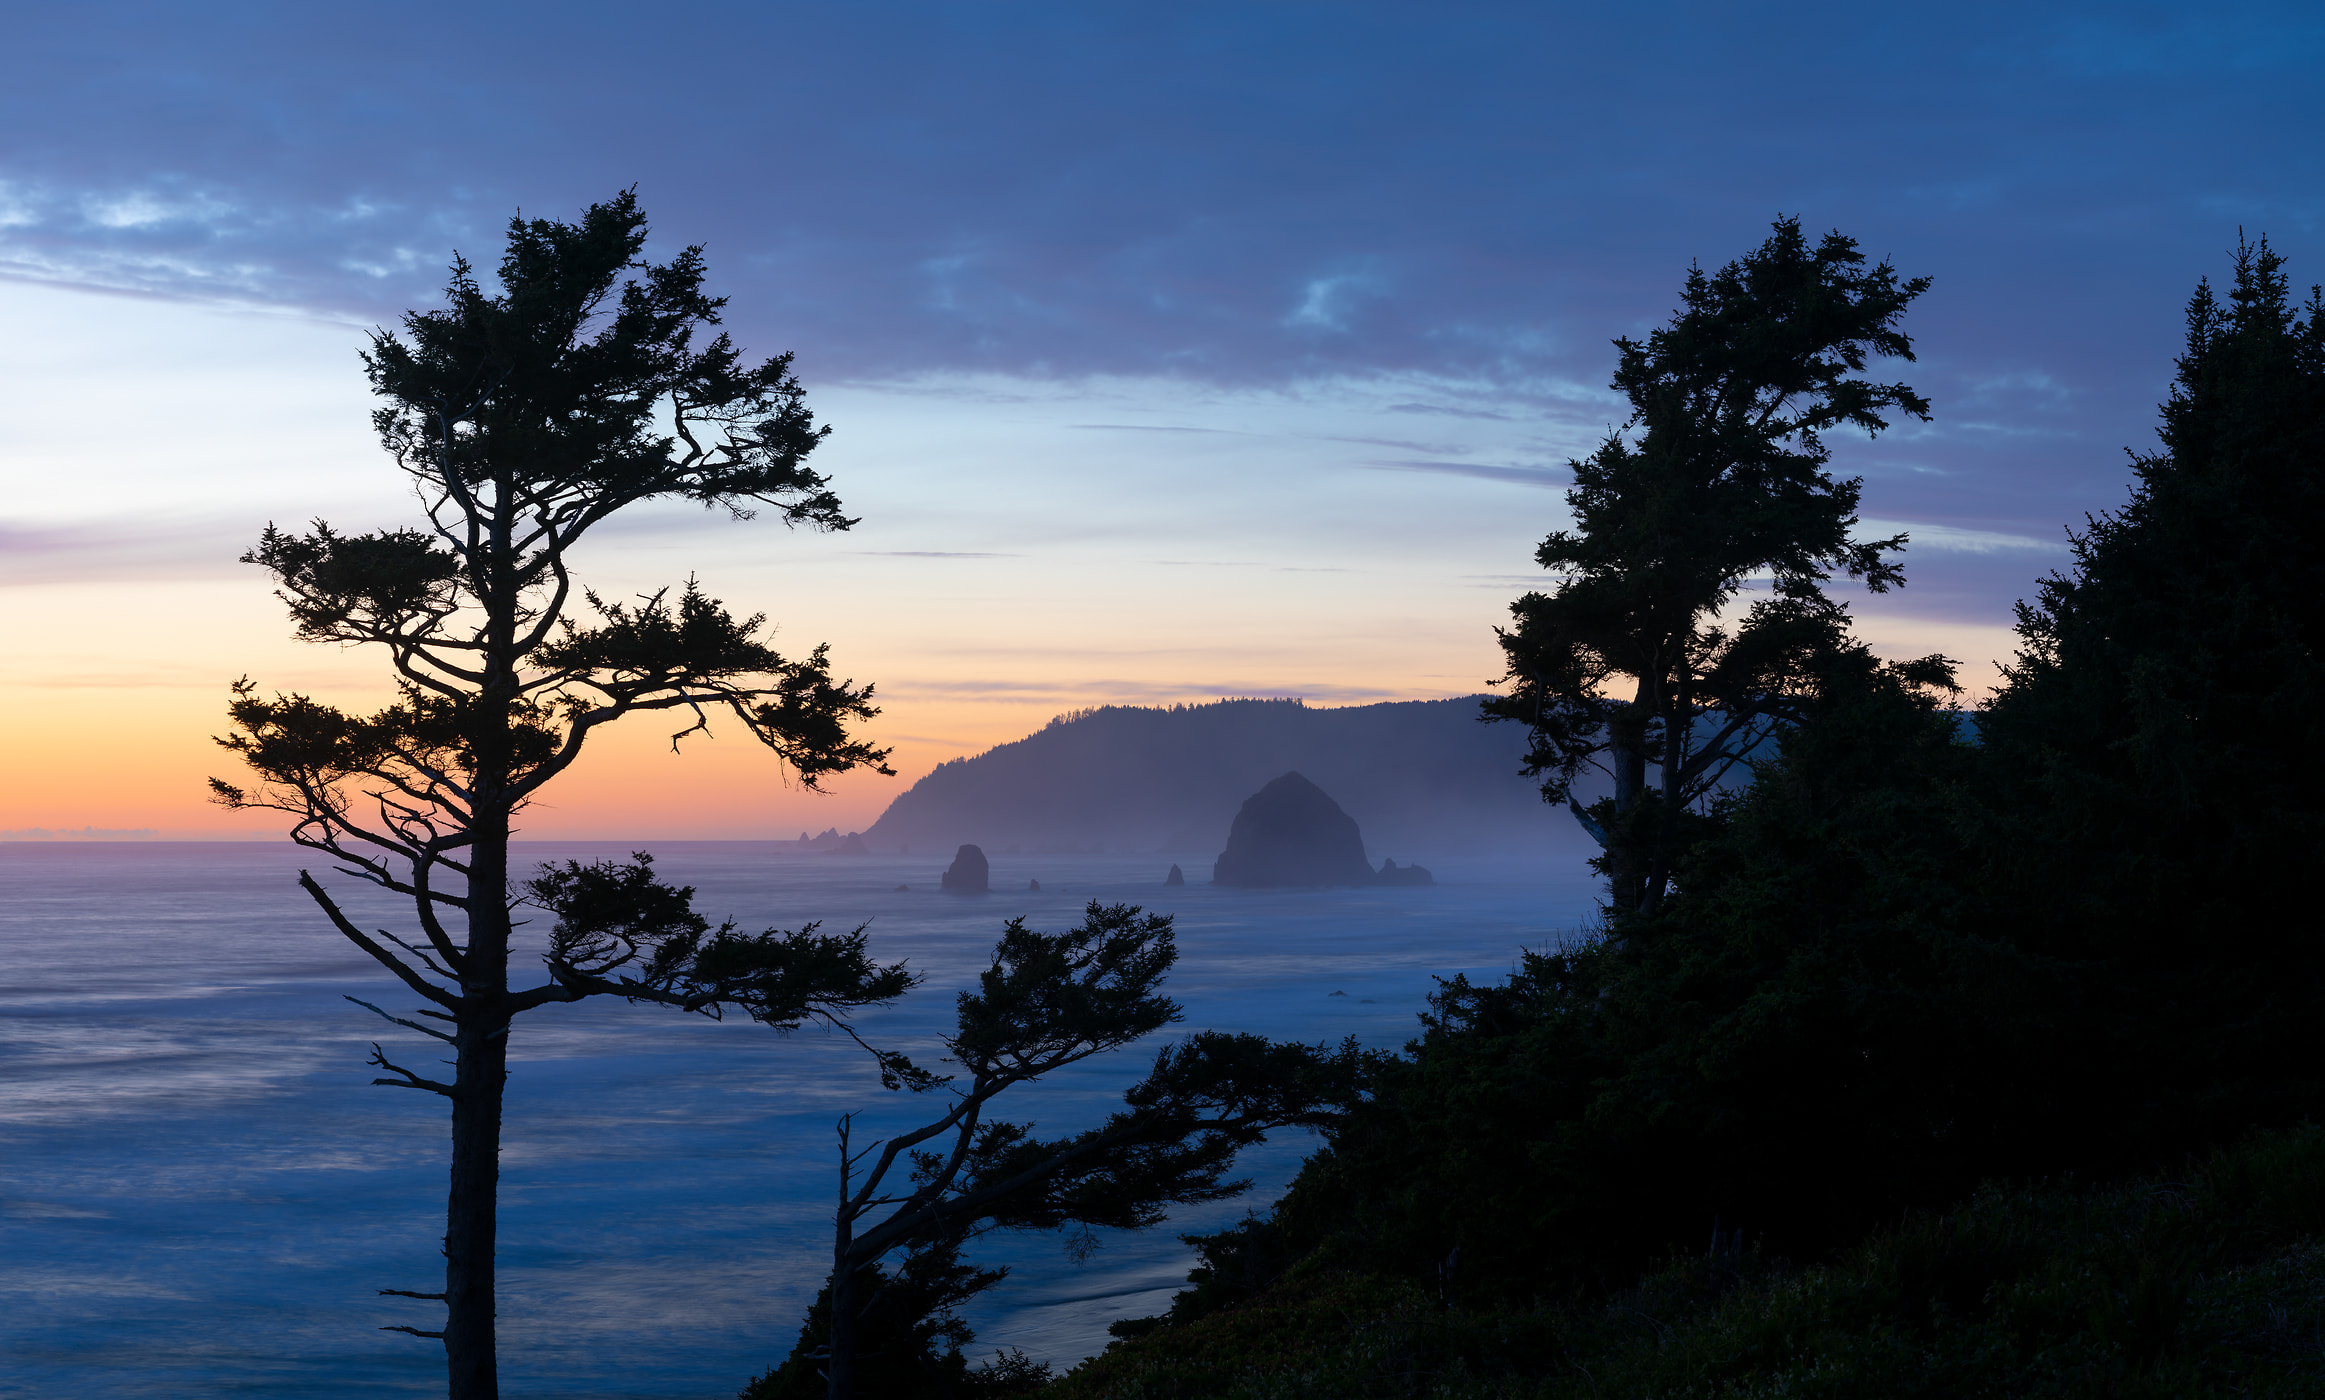 303 megapixels! A very high resolution, large-format VAST photo print of a coastal sunset with the ocean and trees; landscape photograph created by Greg Probst in Cannon Beach, Oregon